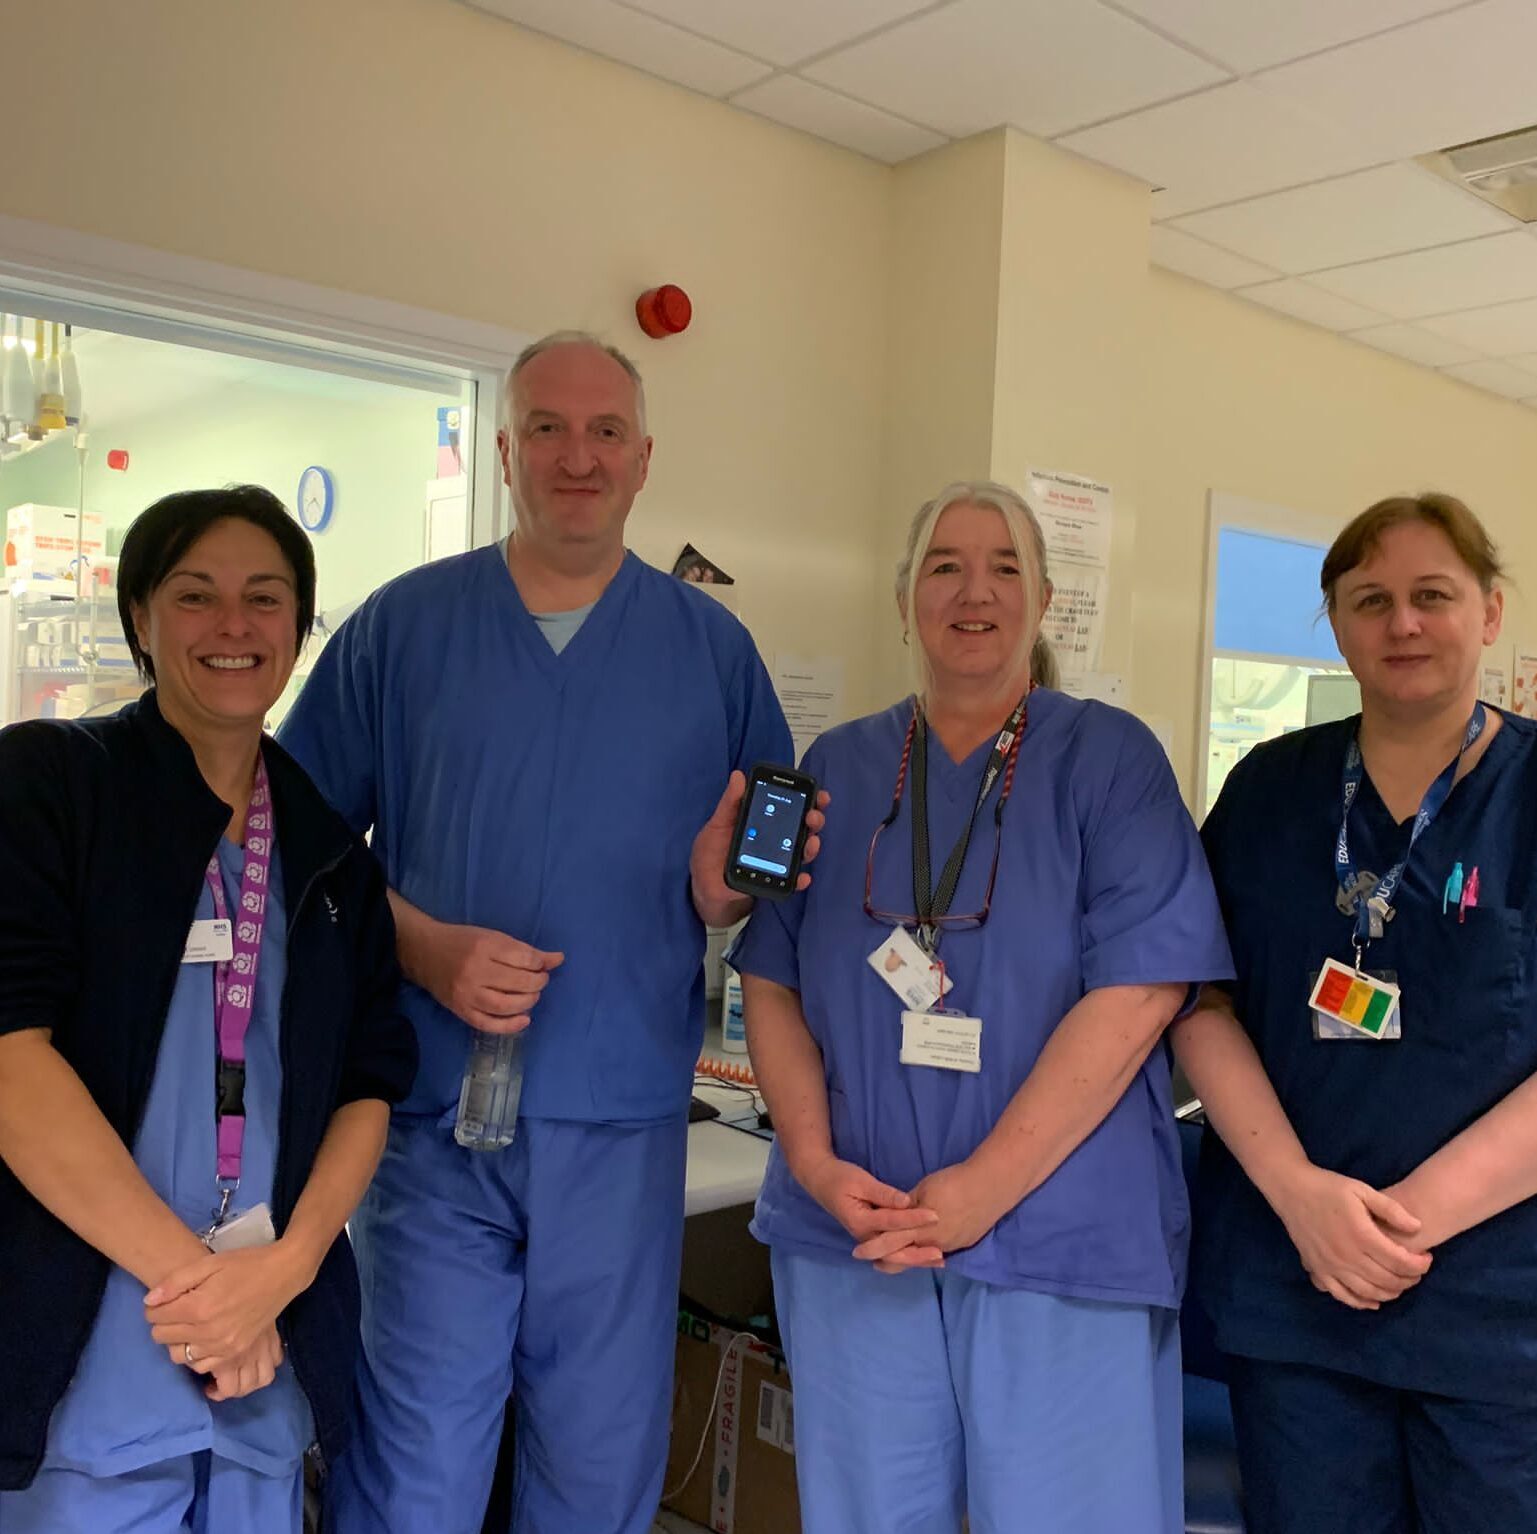 Some of the team at NHS Lothian's Interventional Radiology Team, smile together for the camera. Four people pictured. The team were the first team in Scotland to implement Scan for Safety's Point of Care